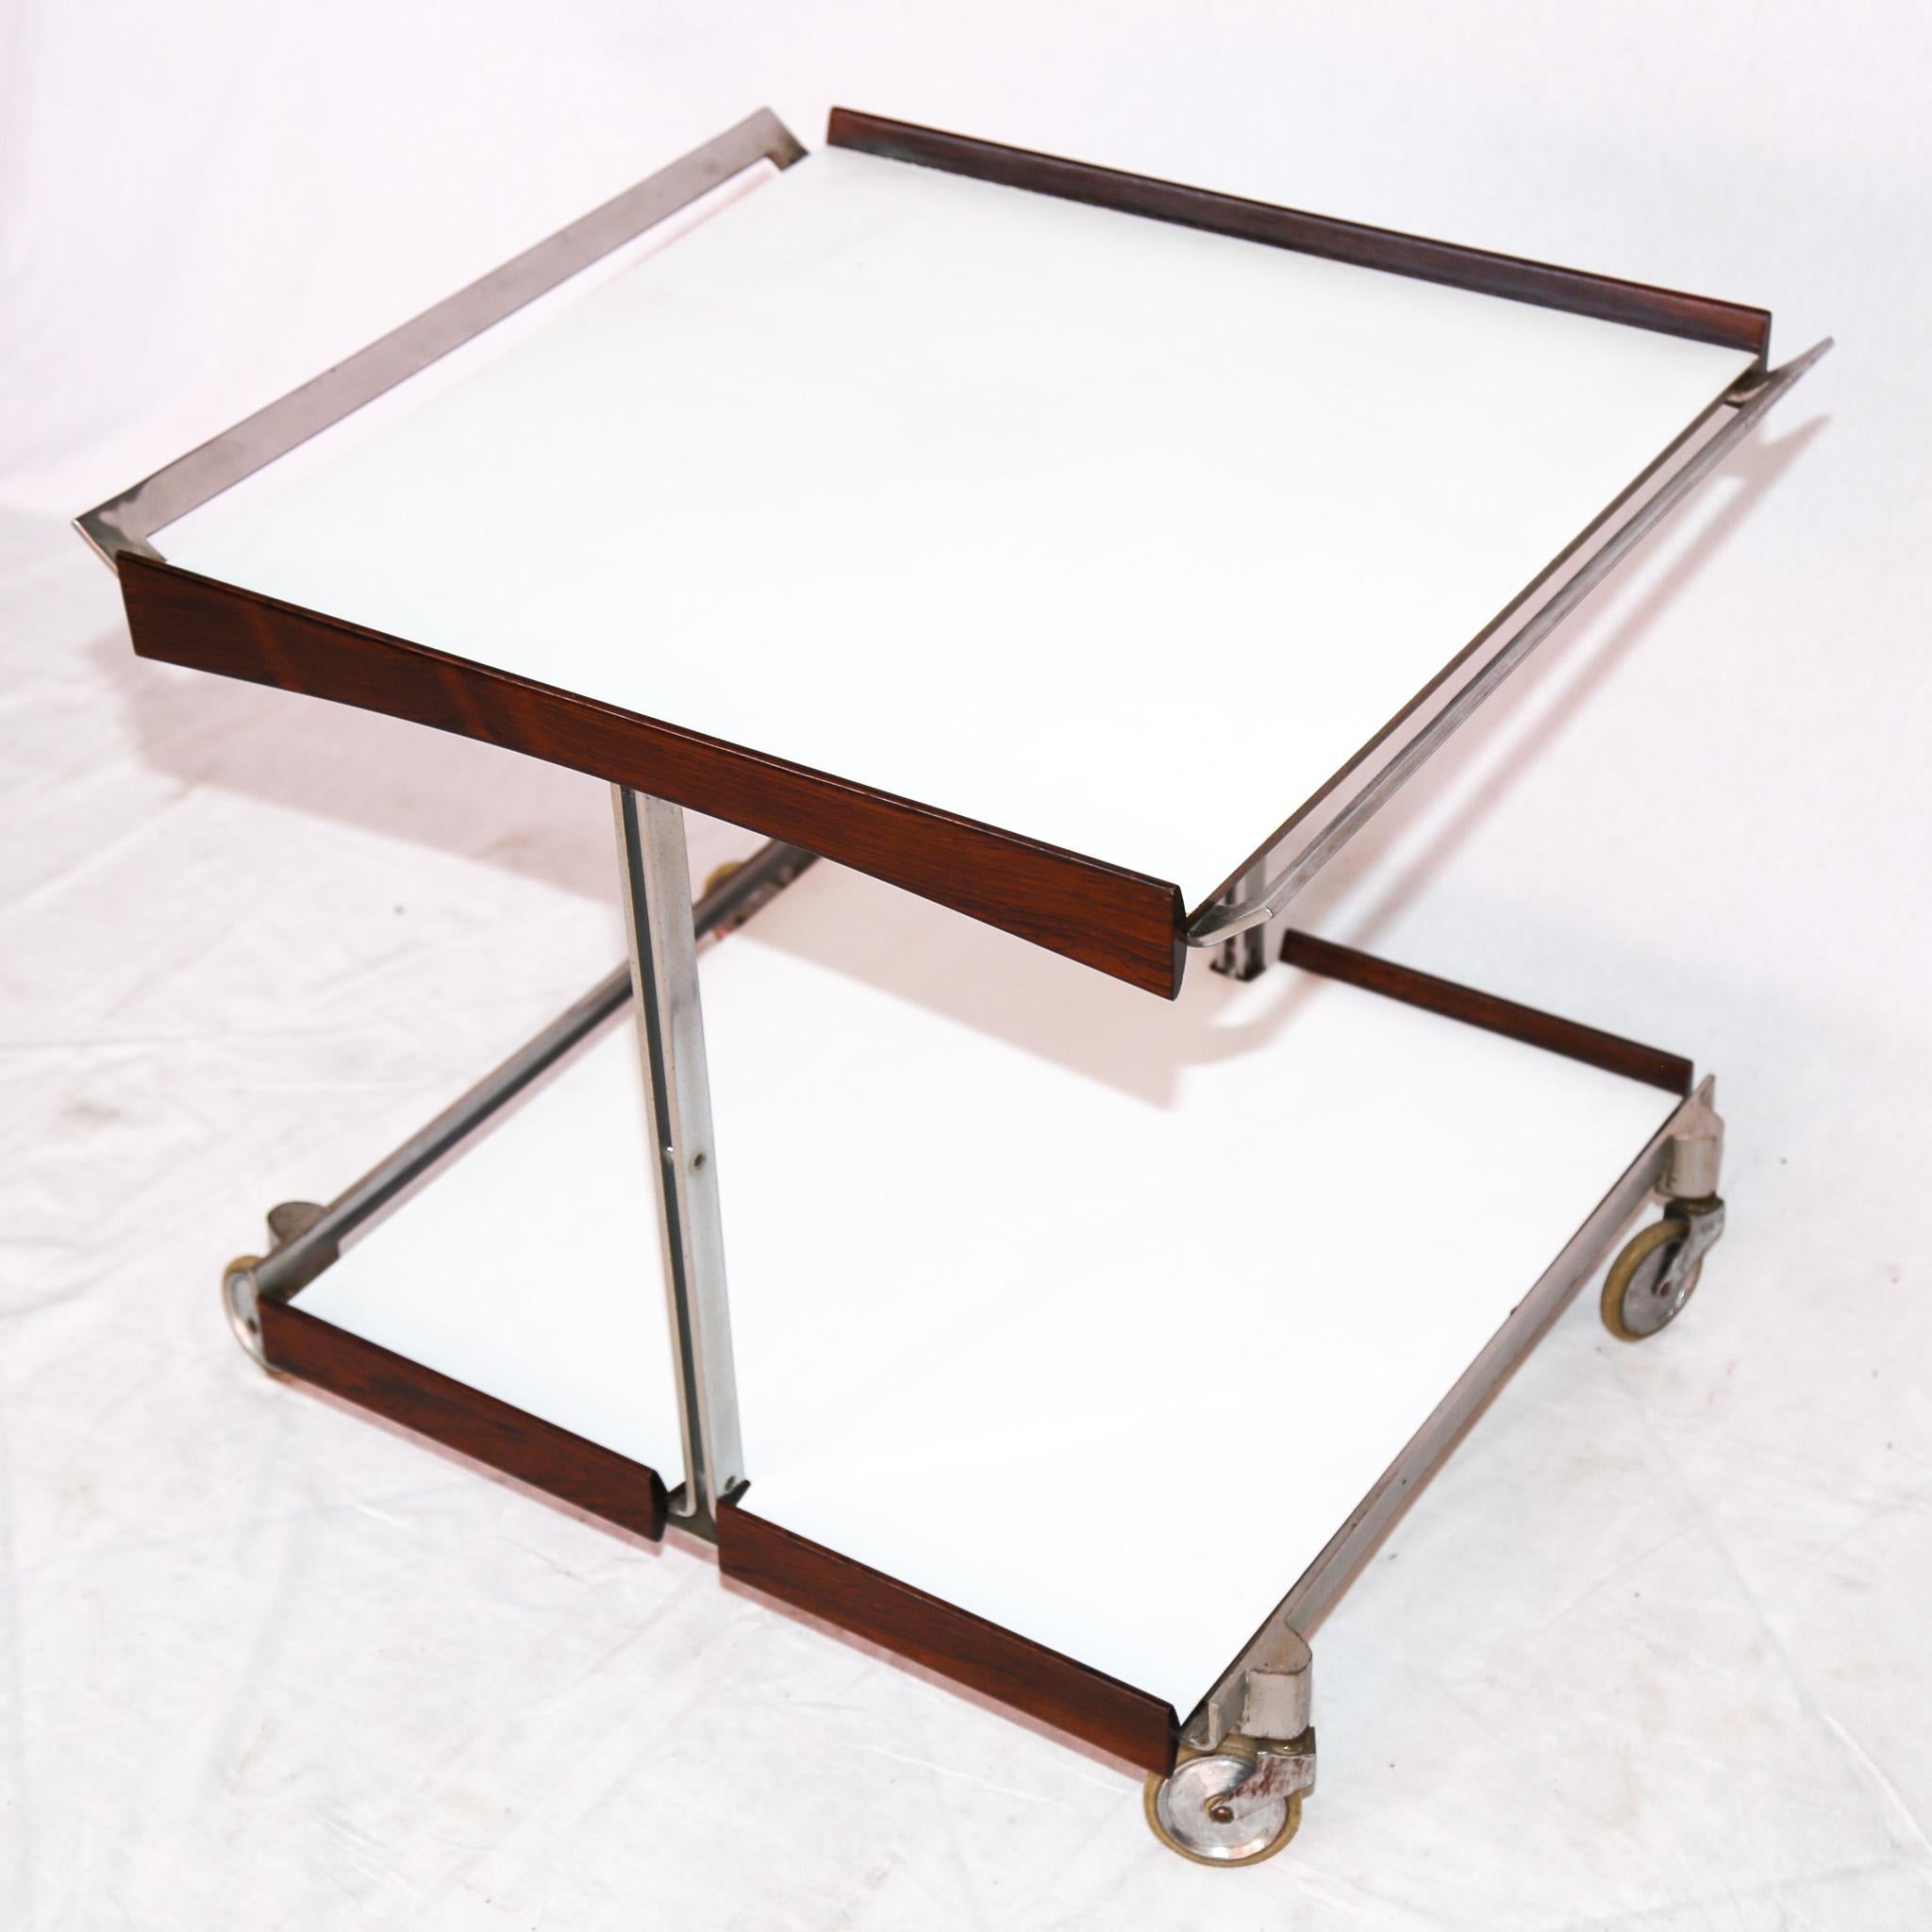 Mid-20th Century Brazilian Modern Bar Cart in Hardwood, Chrome, and White Formica by Forma, 1960s For Sale